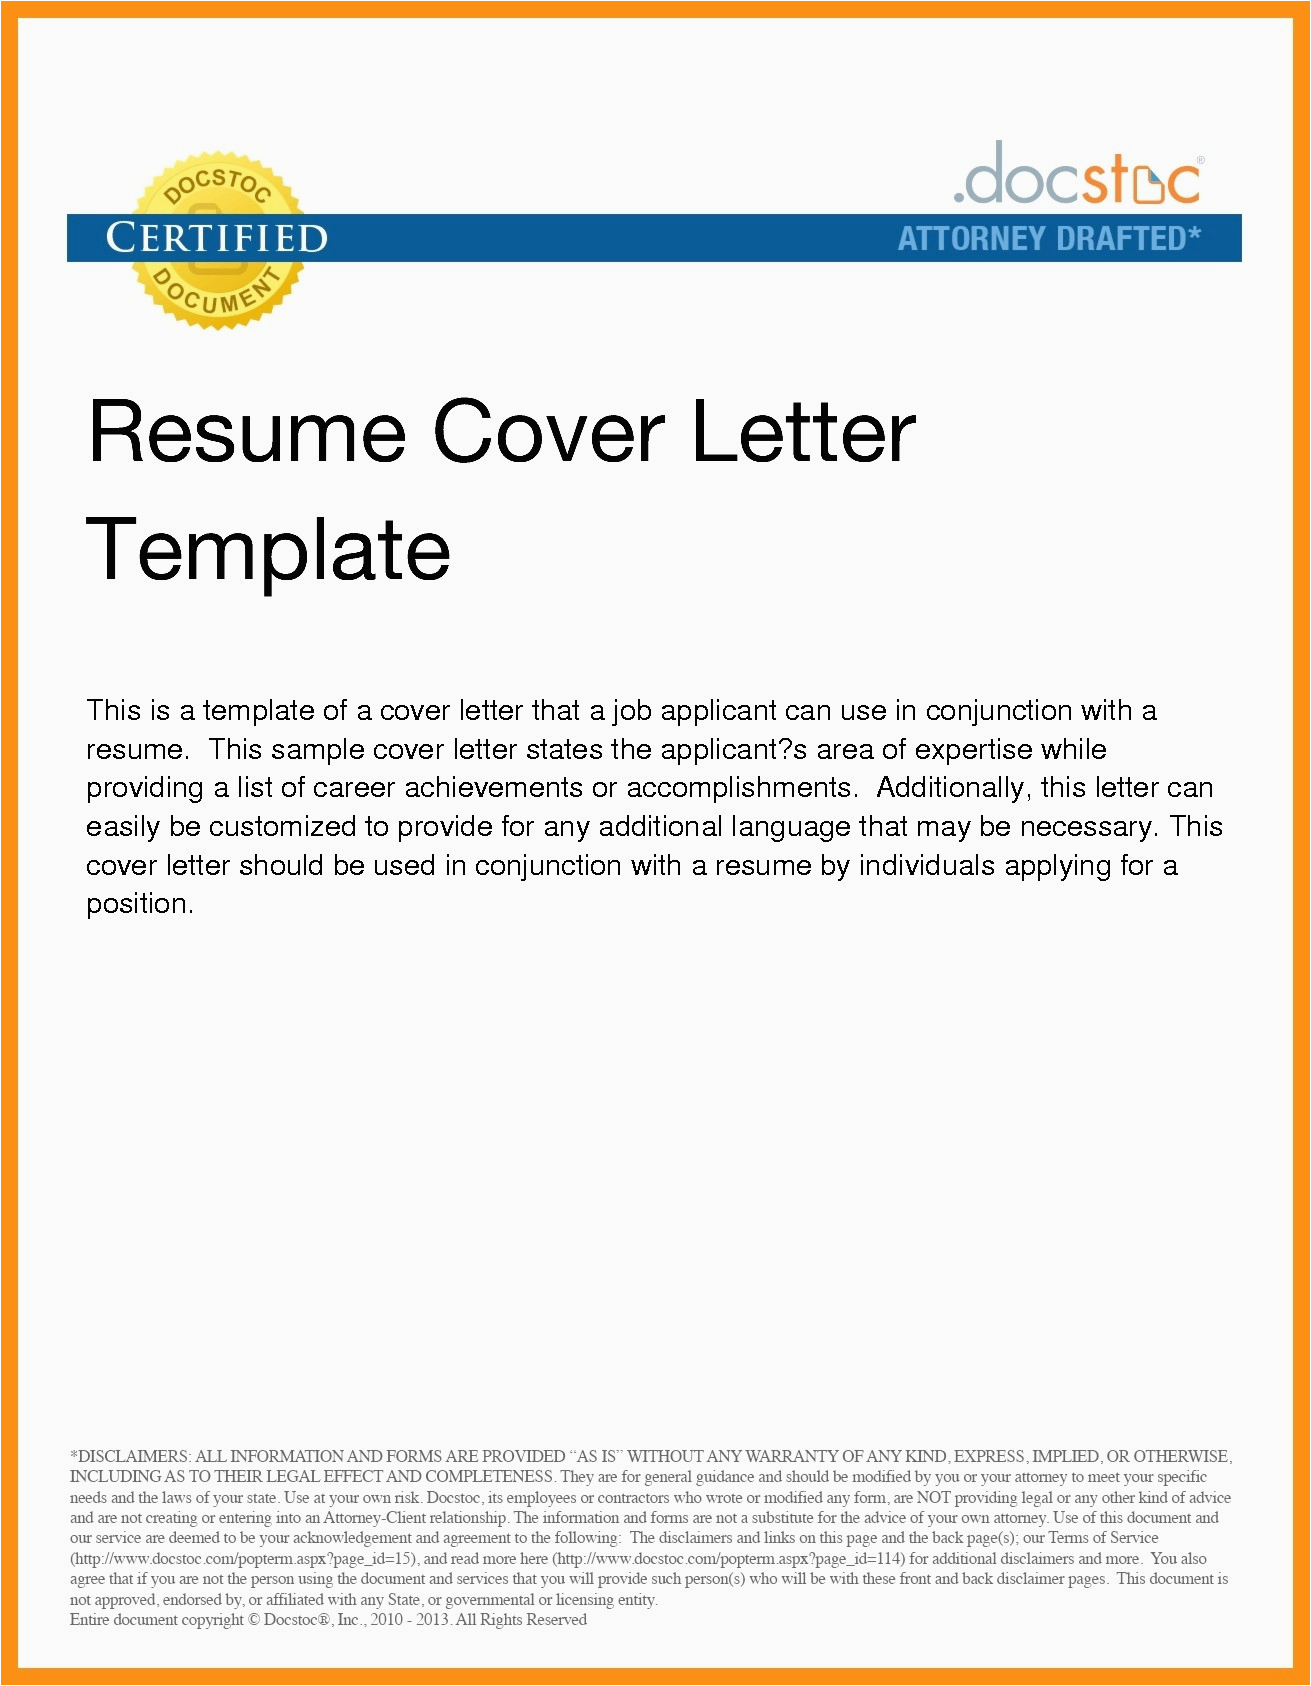 Sample Email Template for Sending Resume Sending Resume and Cover Letter by Email Collection